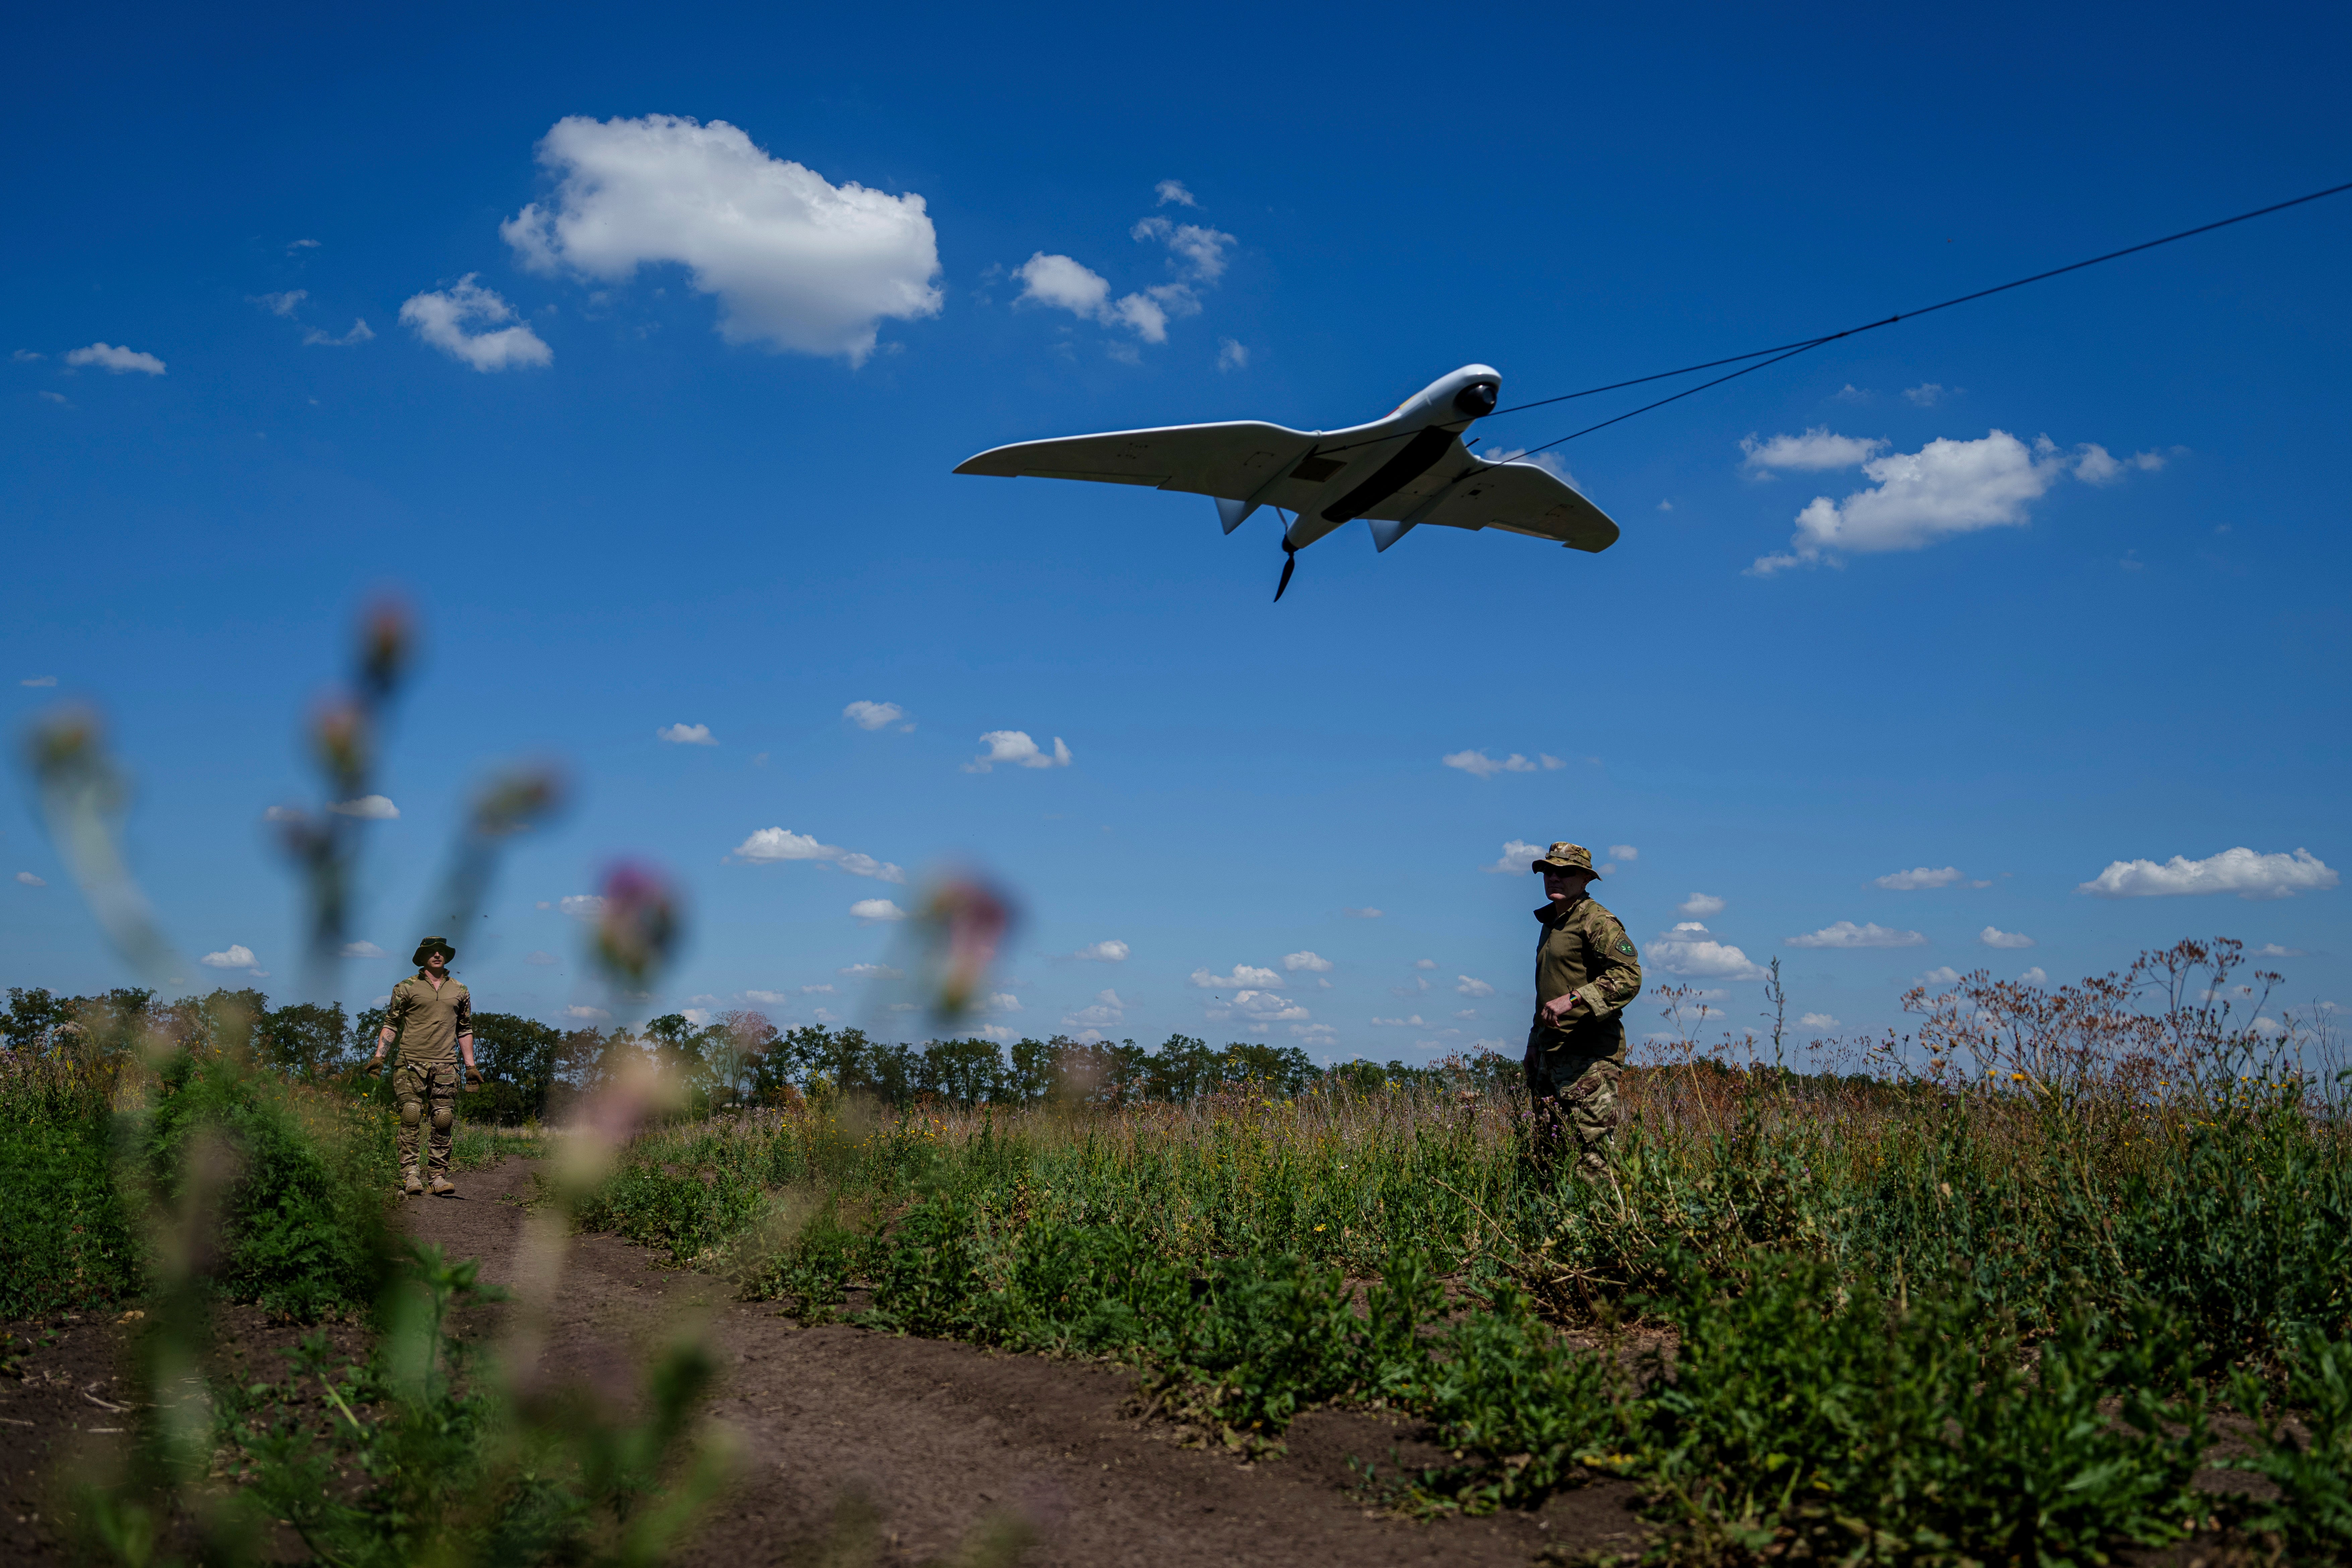 Ukrainian servicemen of the Ochi reconnaissance unit launch a Furia drone to fly over Russian positions at the frontline in Donetsk region